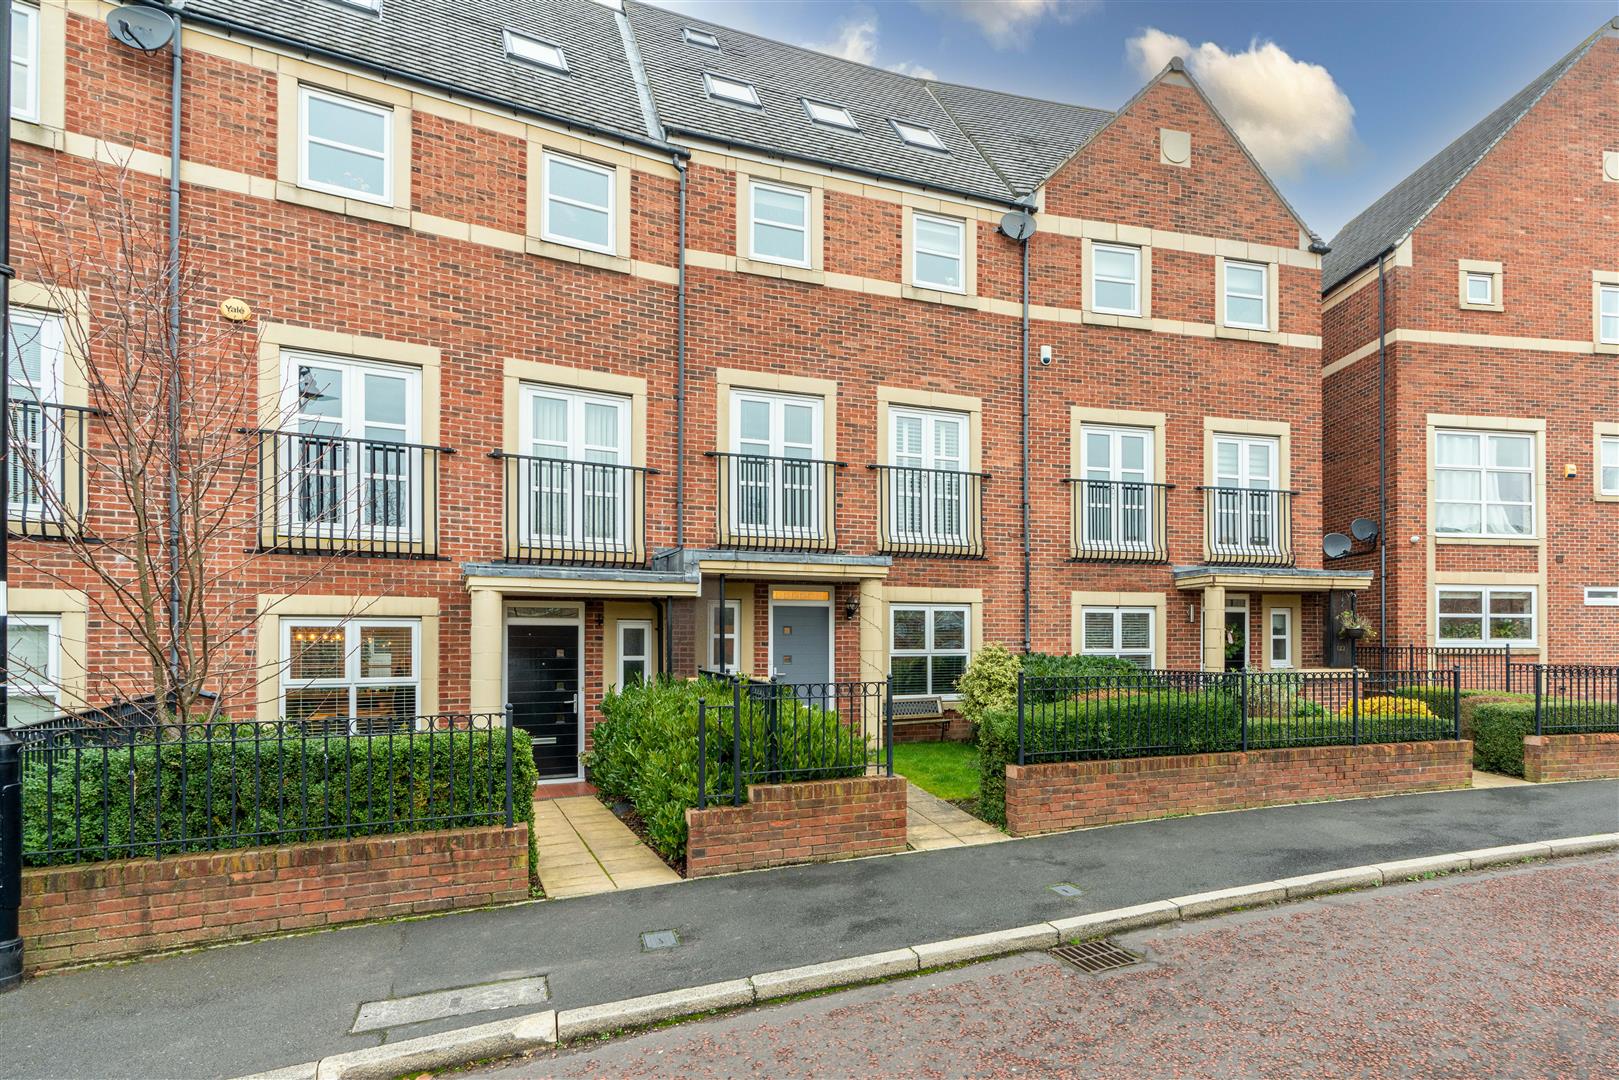 5 bed town house for sale in Featherstone Grove, Great Park - Property Image 1